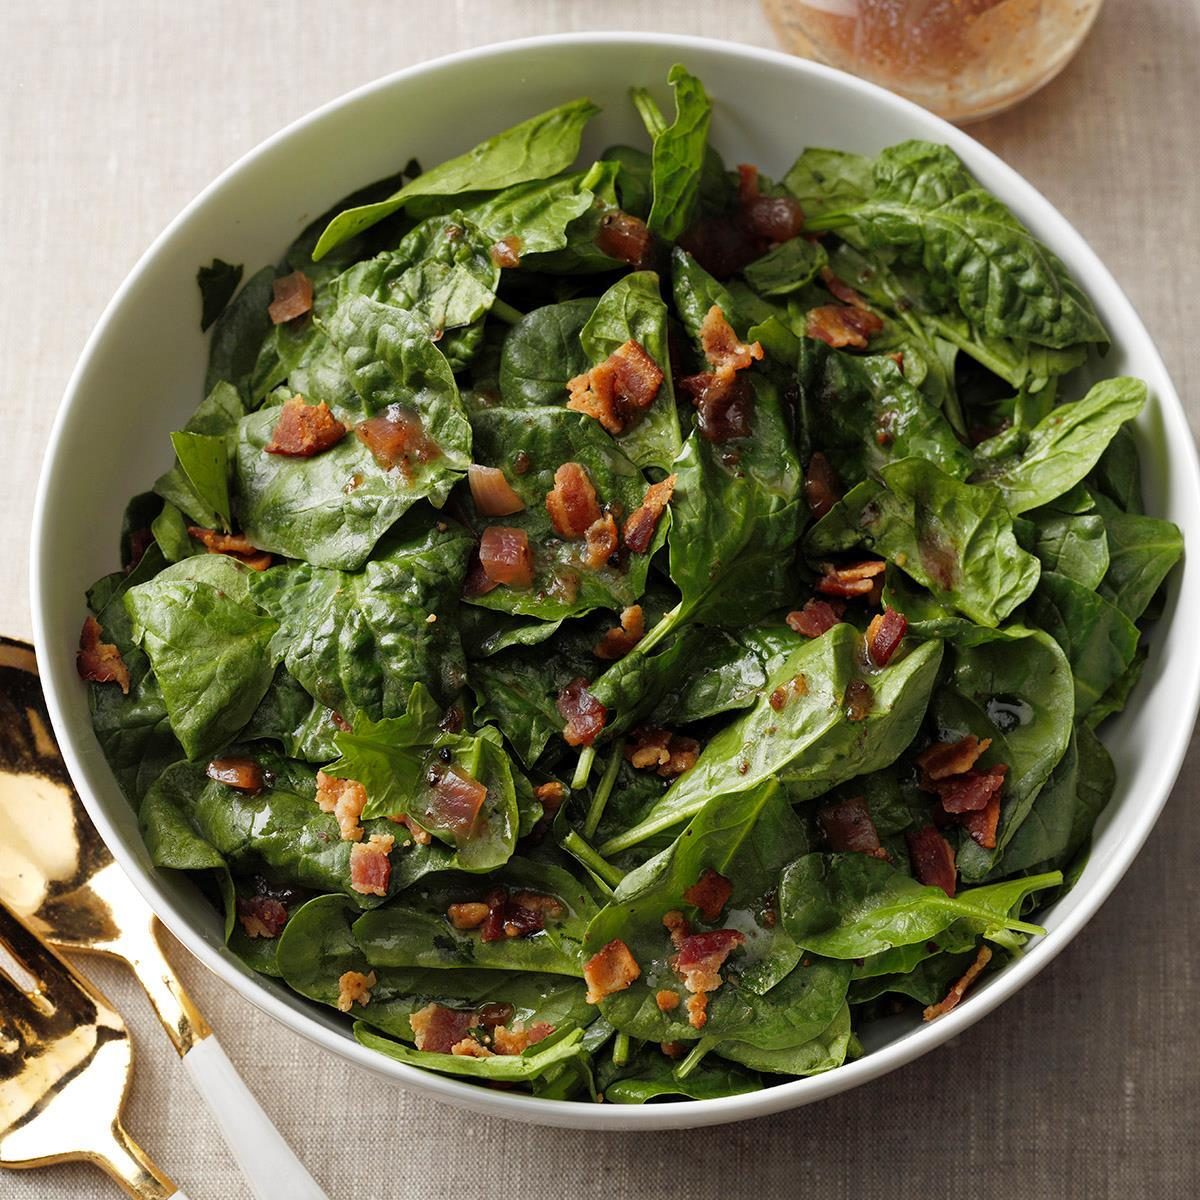 Hearty Spinach Salad With Hot Bacon Dressing Exps Tham19 34327 B11 13 5b 3